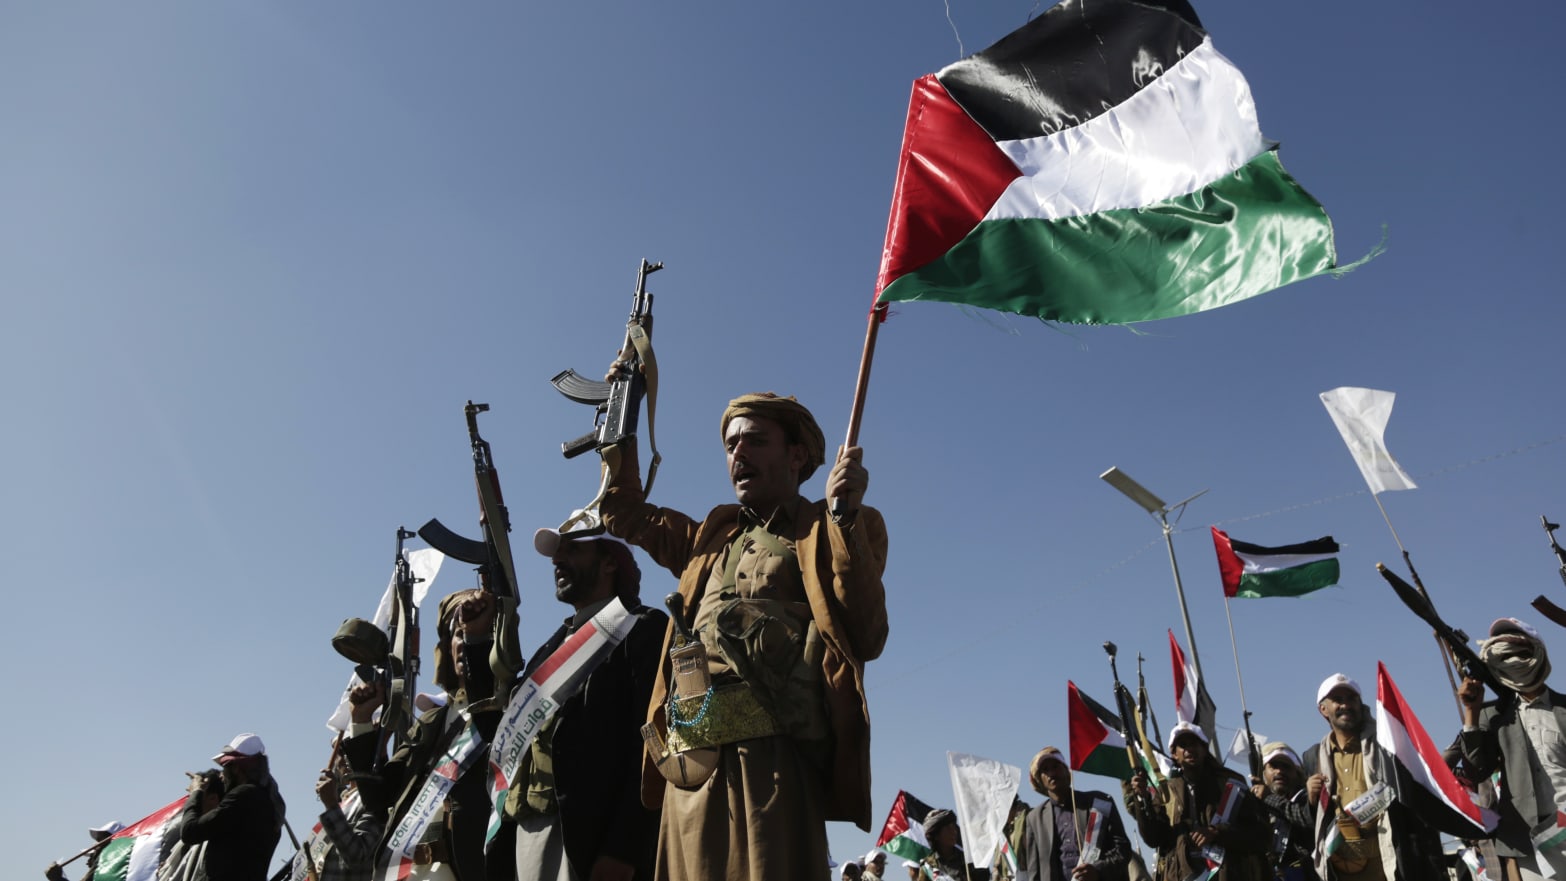 Yemenis recently militarily trained by the Houthi movement holding up their guns and Palestinian flag chant slogans